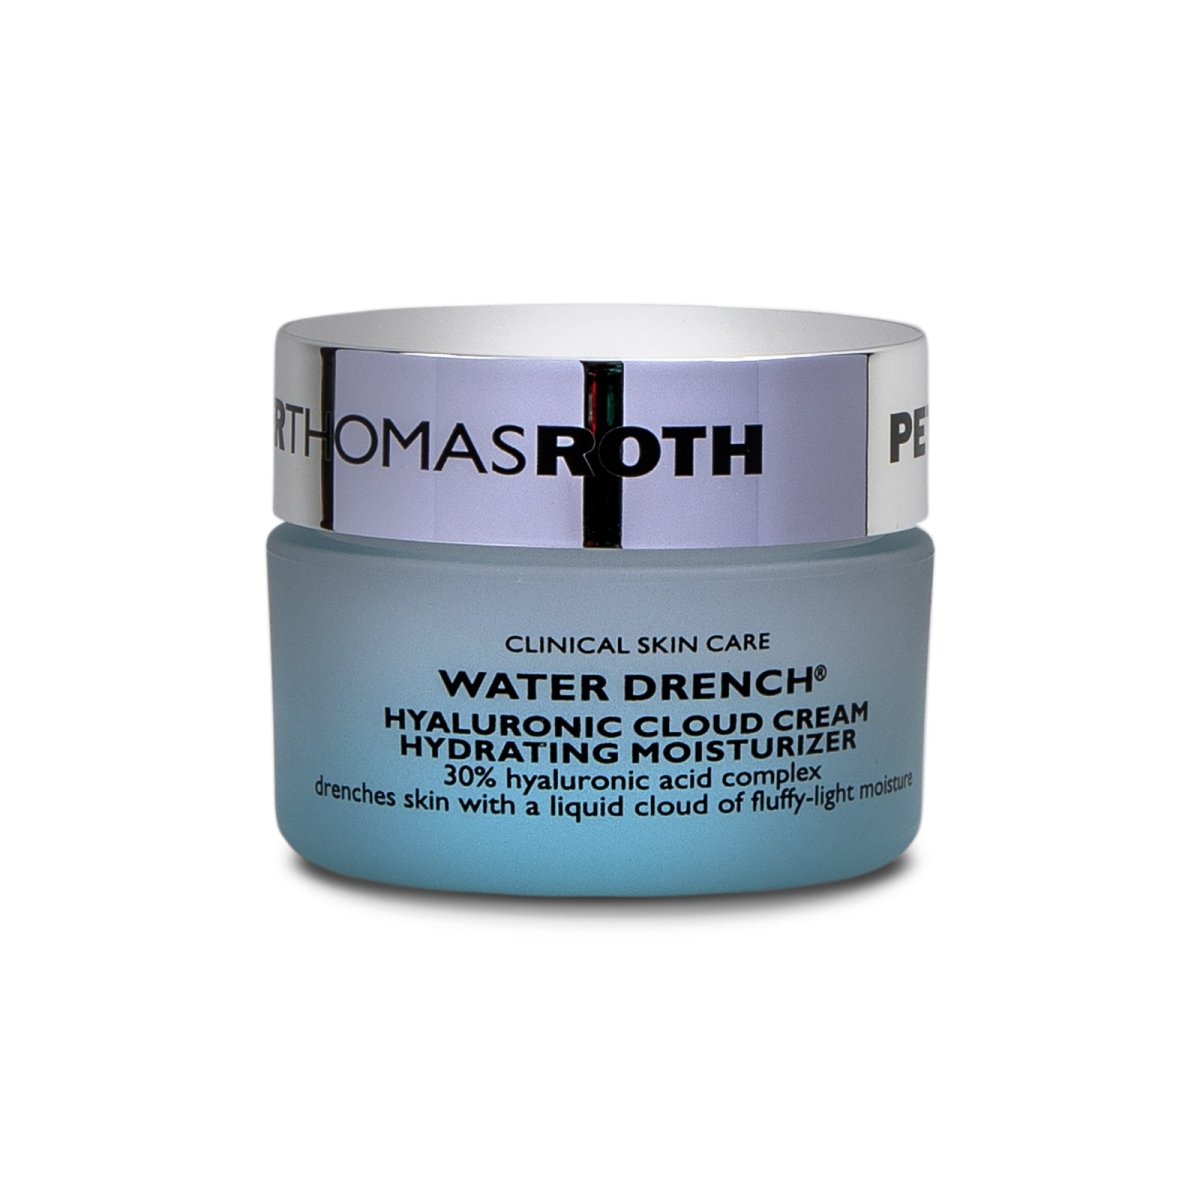 Peter Thomas RothWater Drench® Hyaluronic Cloud Cream Hydrating Moisturizer - SkincareEssentials